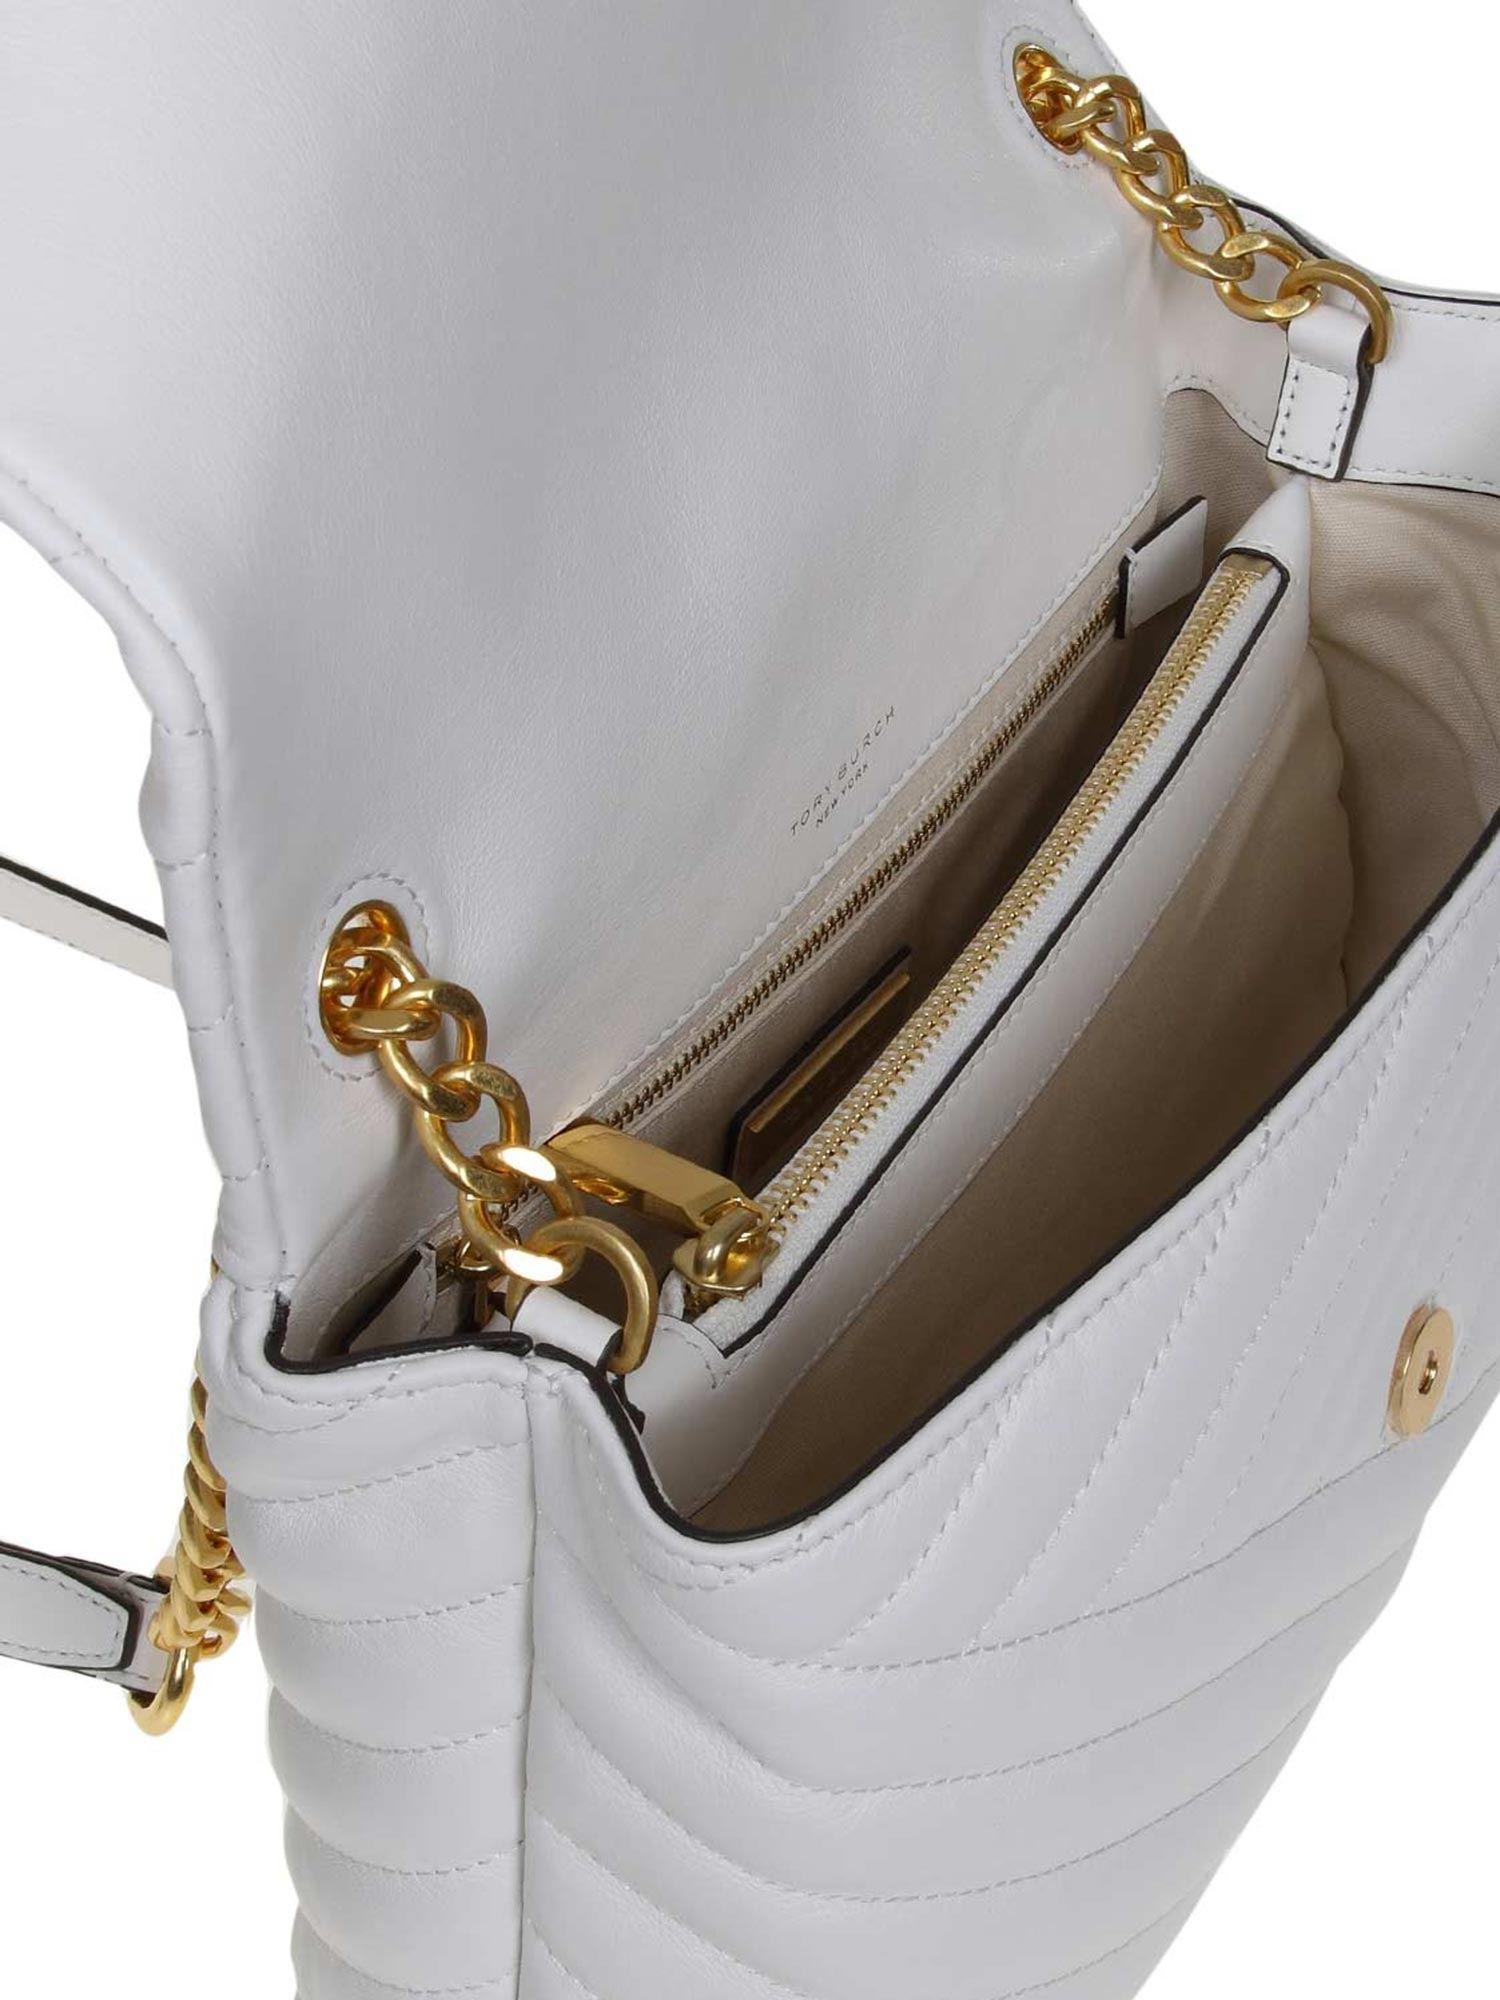 Tory Burch Kira Shoulder Bag In Ivory Color Leather in White - Lyst